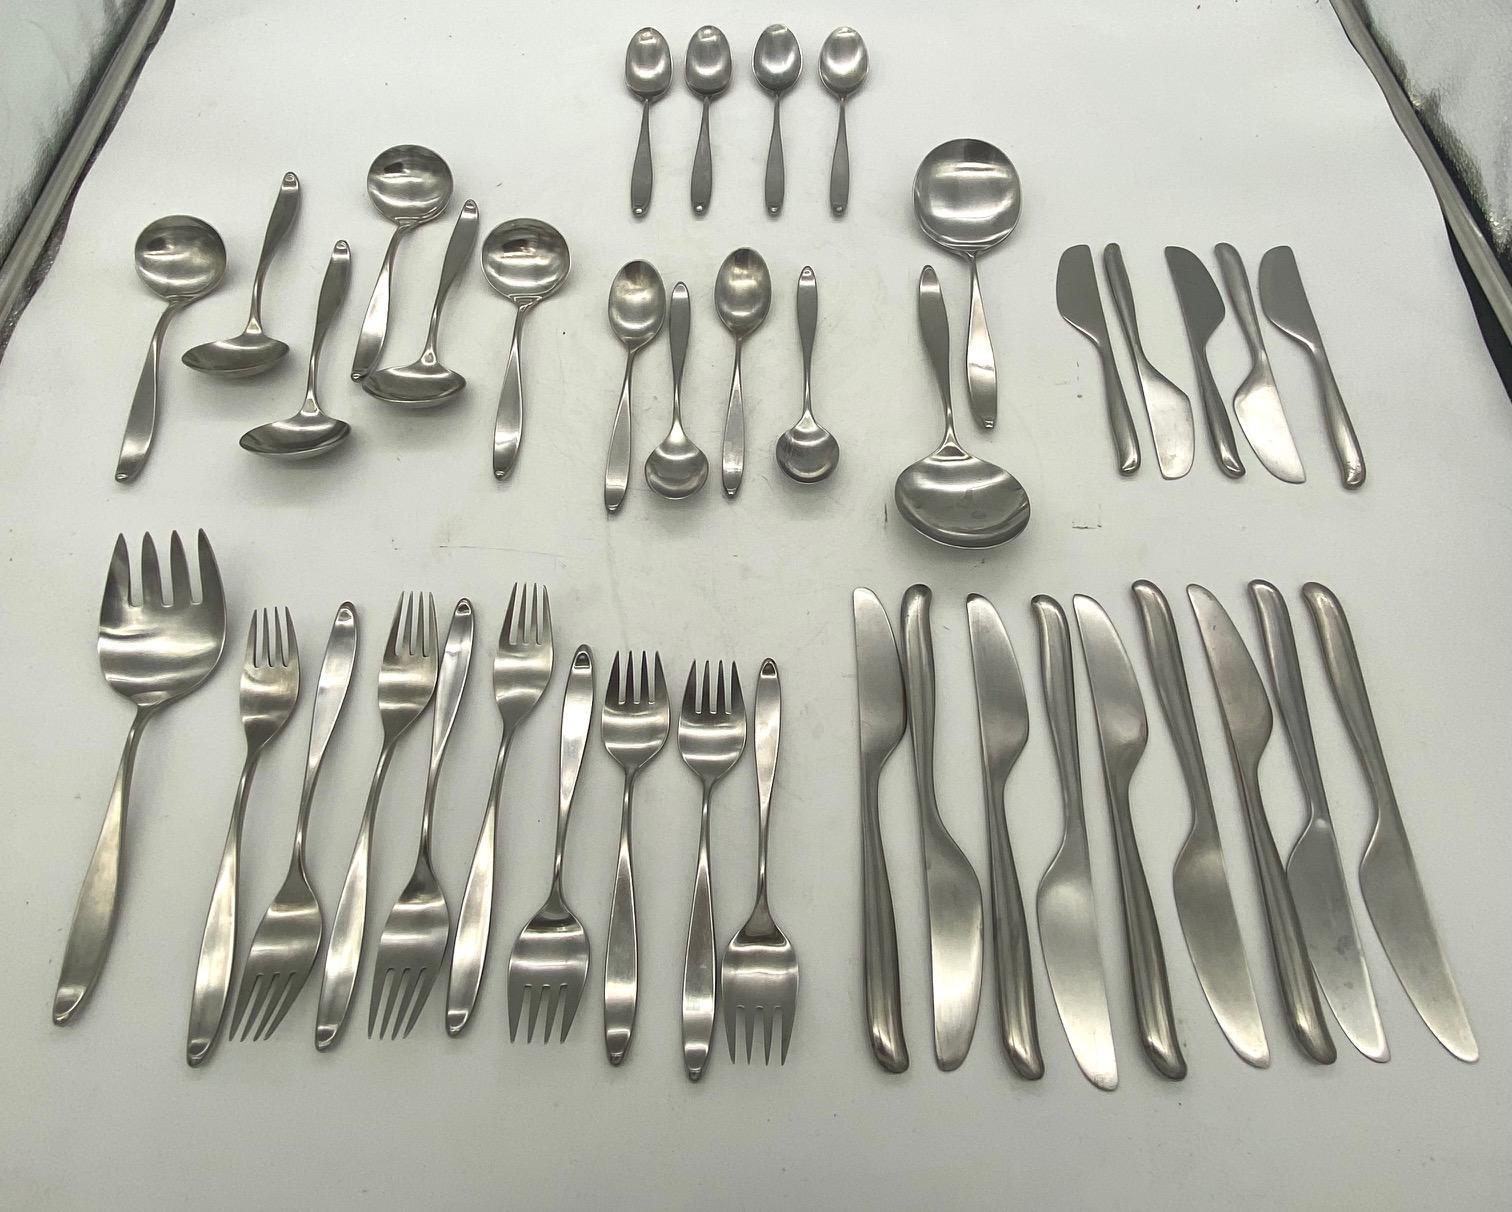 Don Wallance for Lauffer design 2 stainless flatware set of 40. One of the most popular mid-century patterns, Lauffer Design 2 retains the crown for beautiful design, functionality, and strong utility in stainless flatware. These are a true vintage